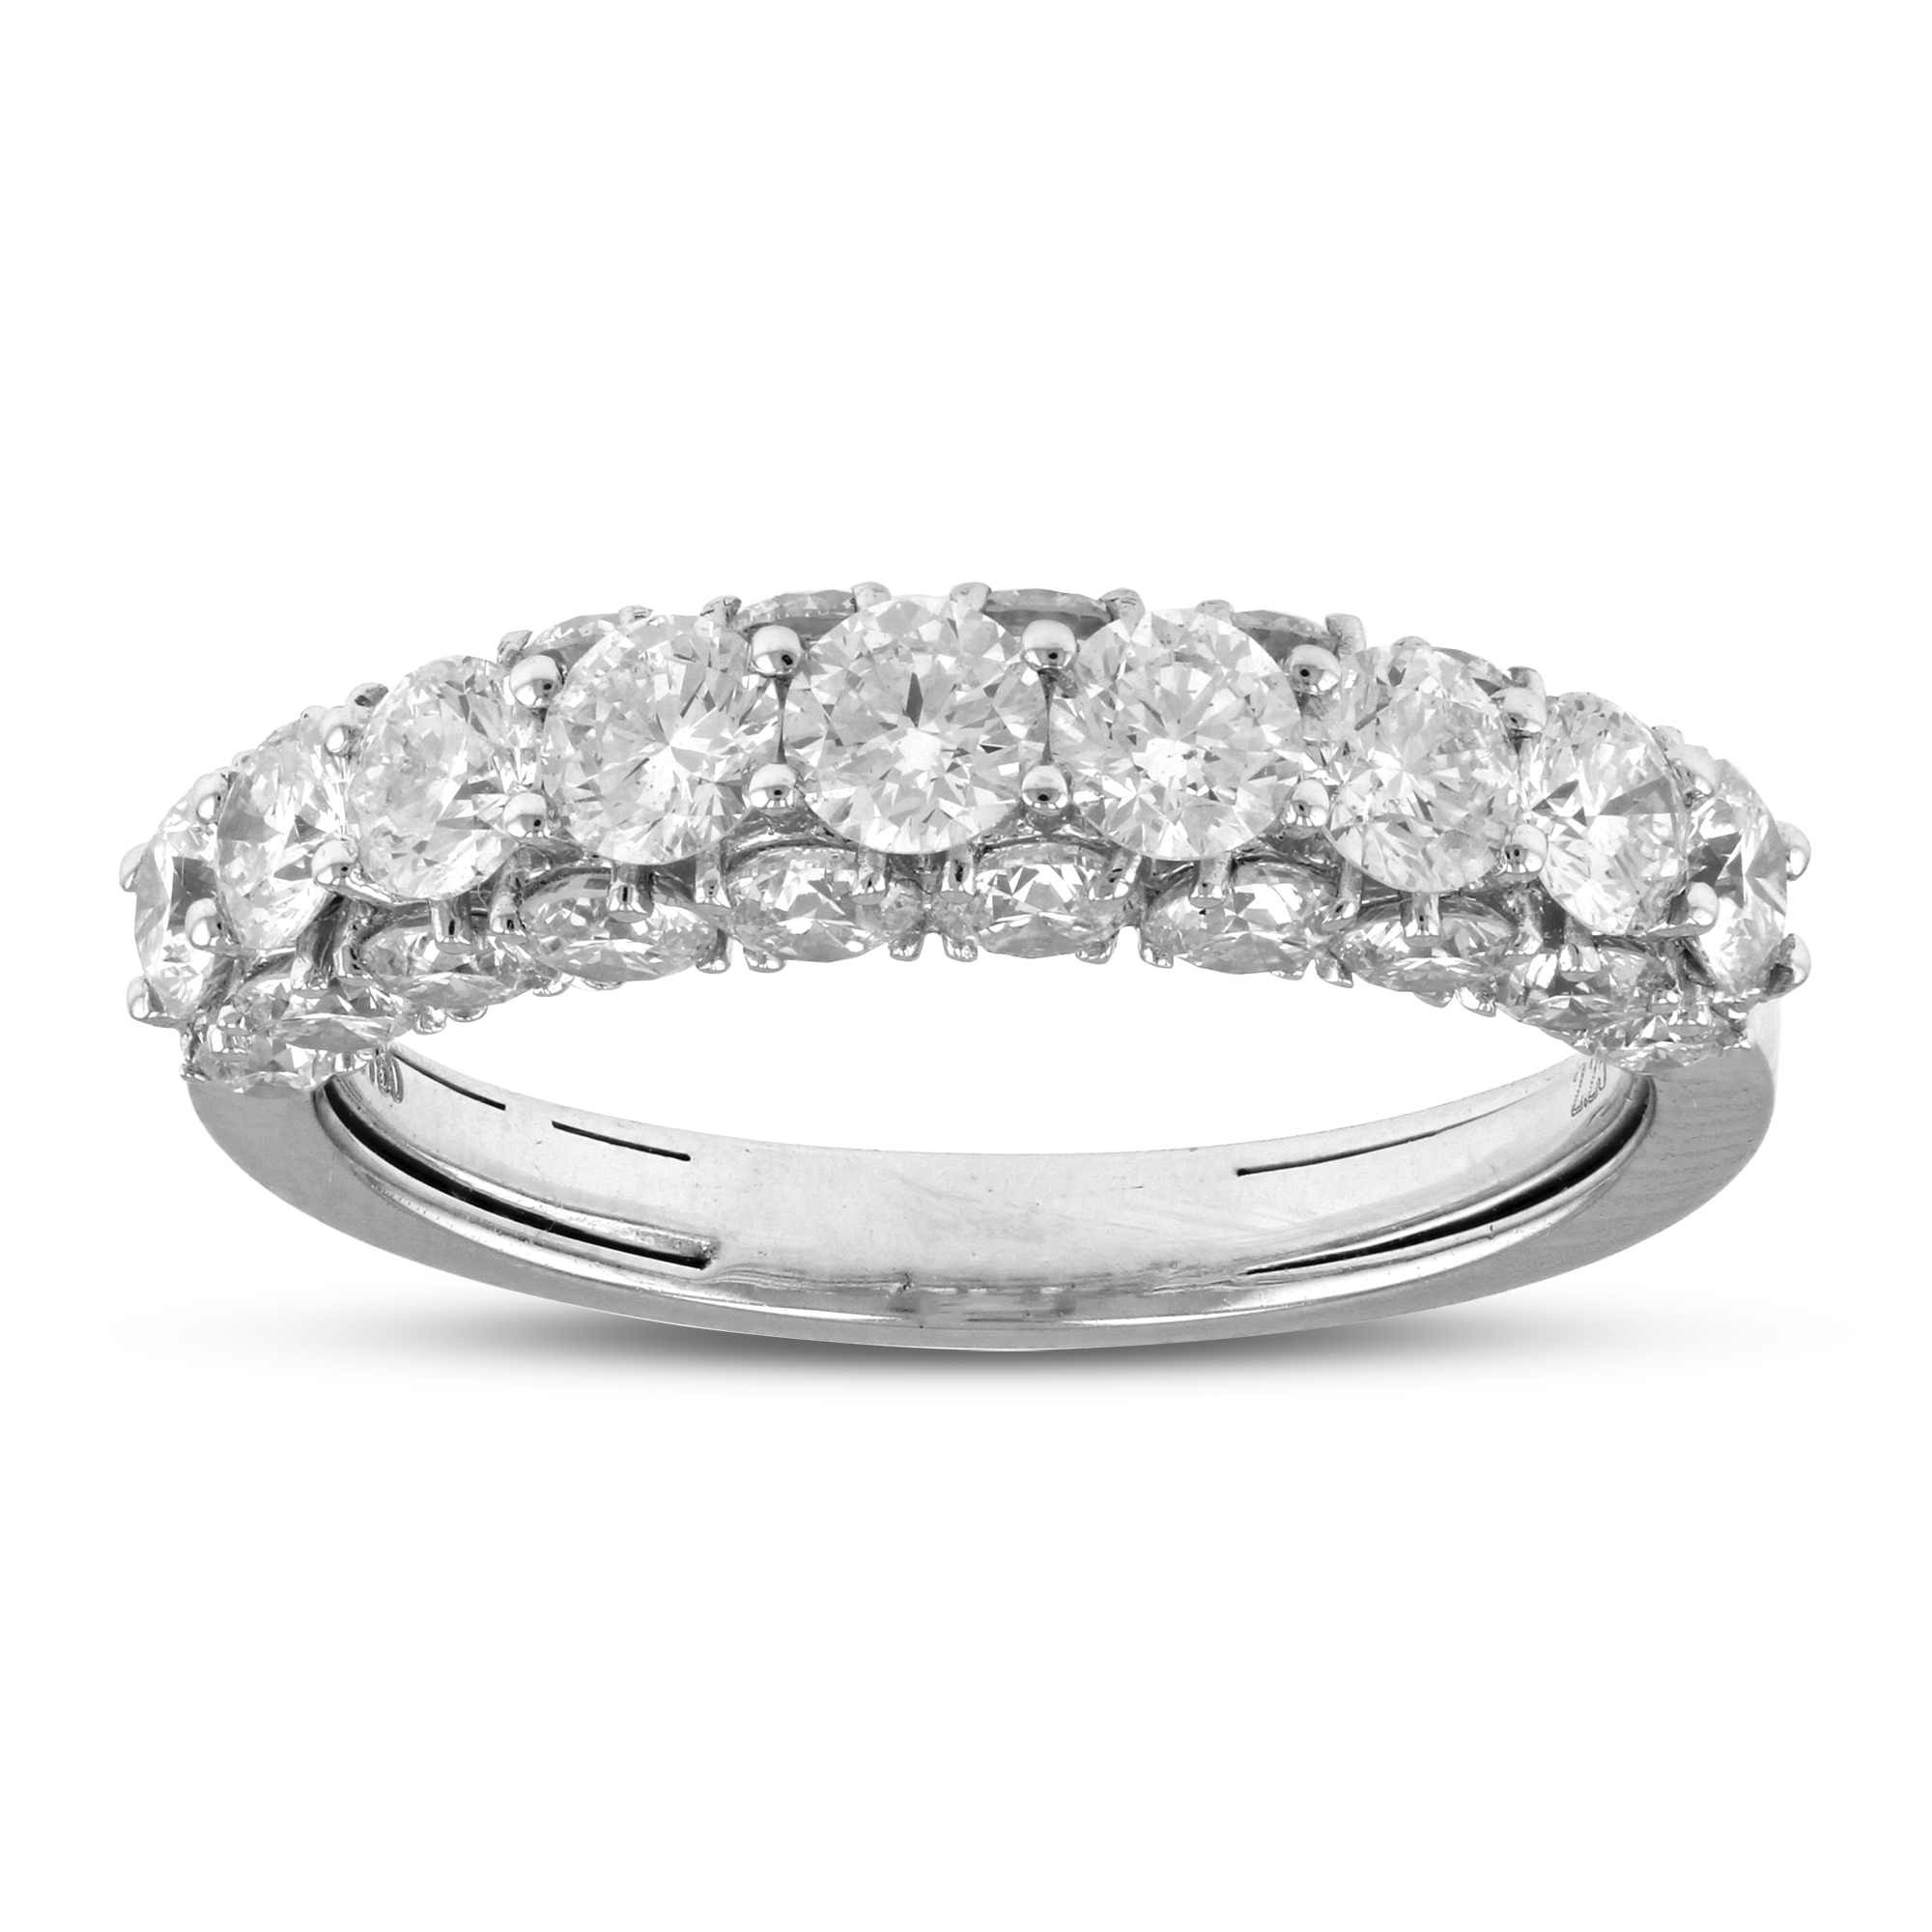 View 2.25ctw Diamond Band in 18k White Gold